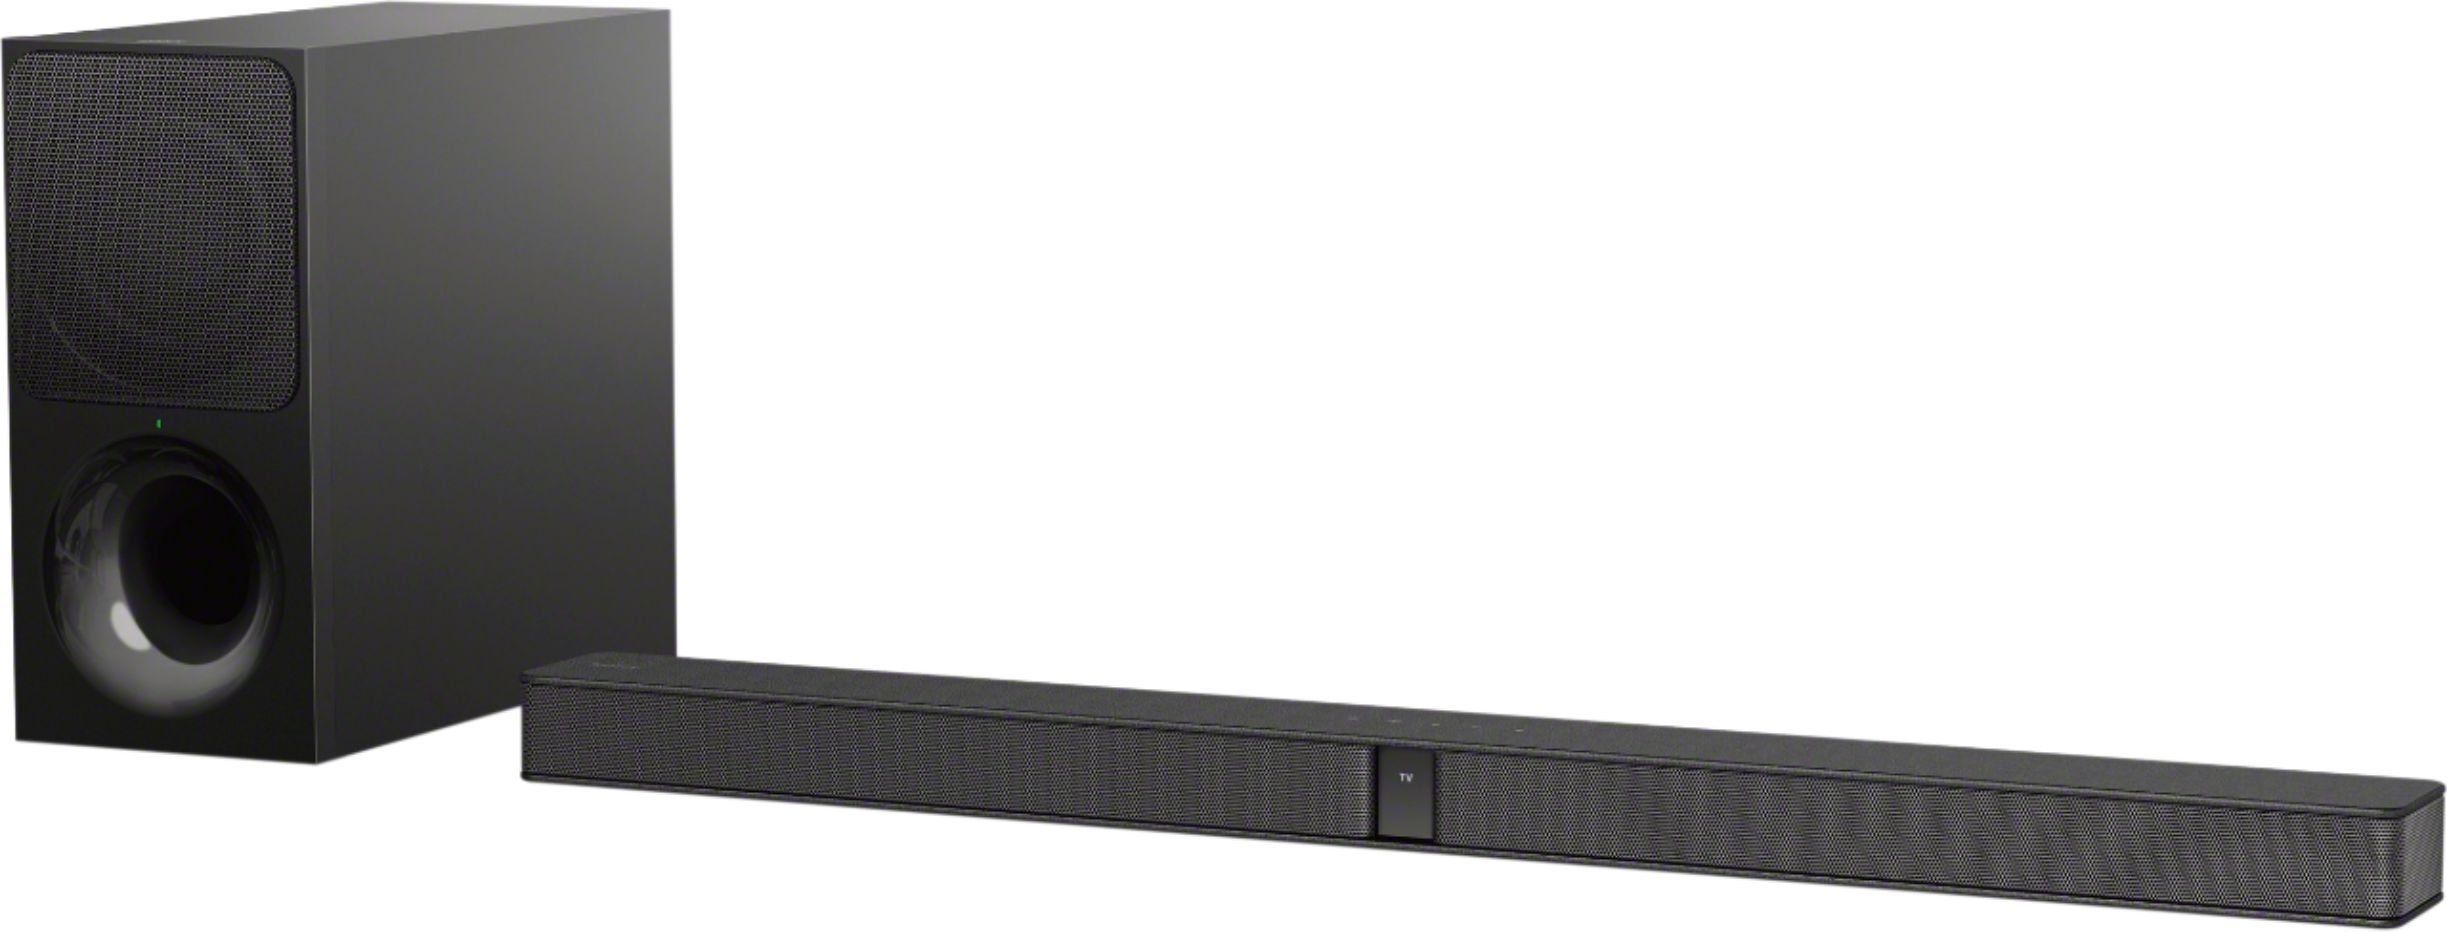 Sony HT-S40R soundbar review: Quality sound bytes at an affordable price -  The Economic Times